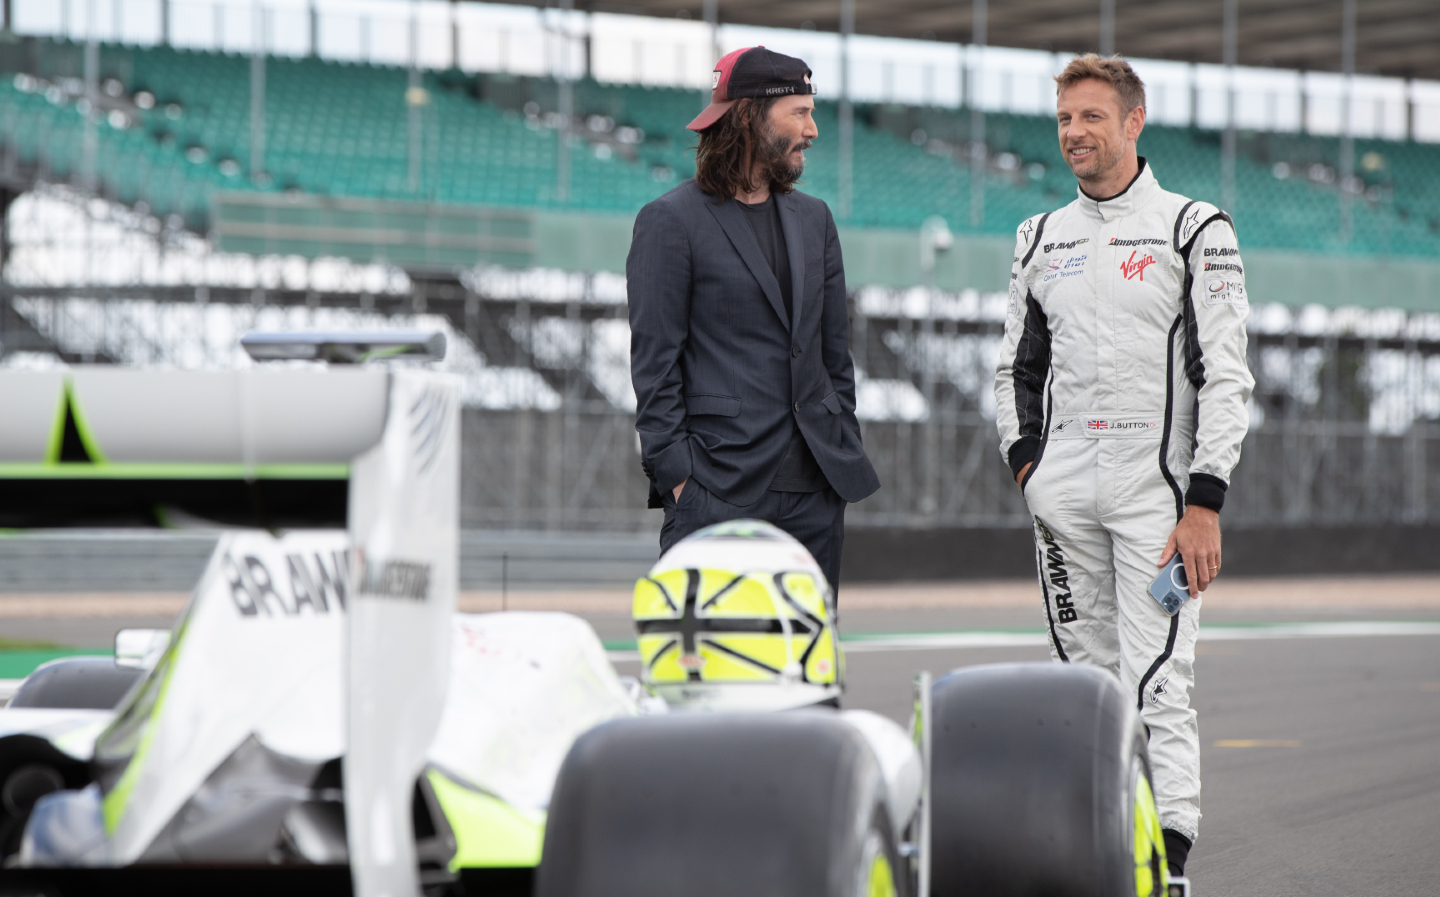 Keanu Reeves and Jenson Button on Brawn GP documentary